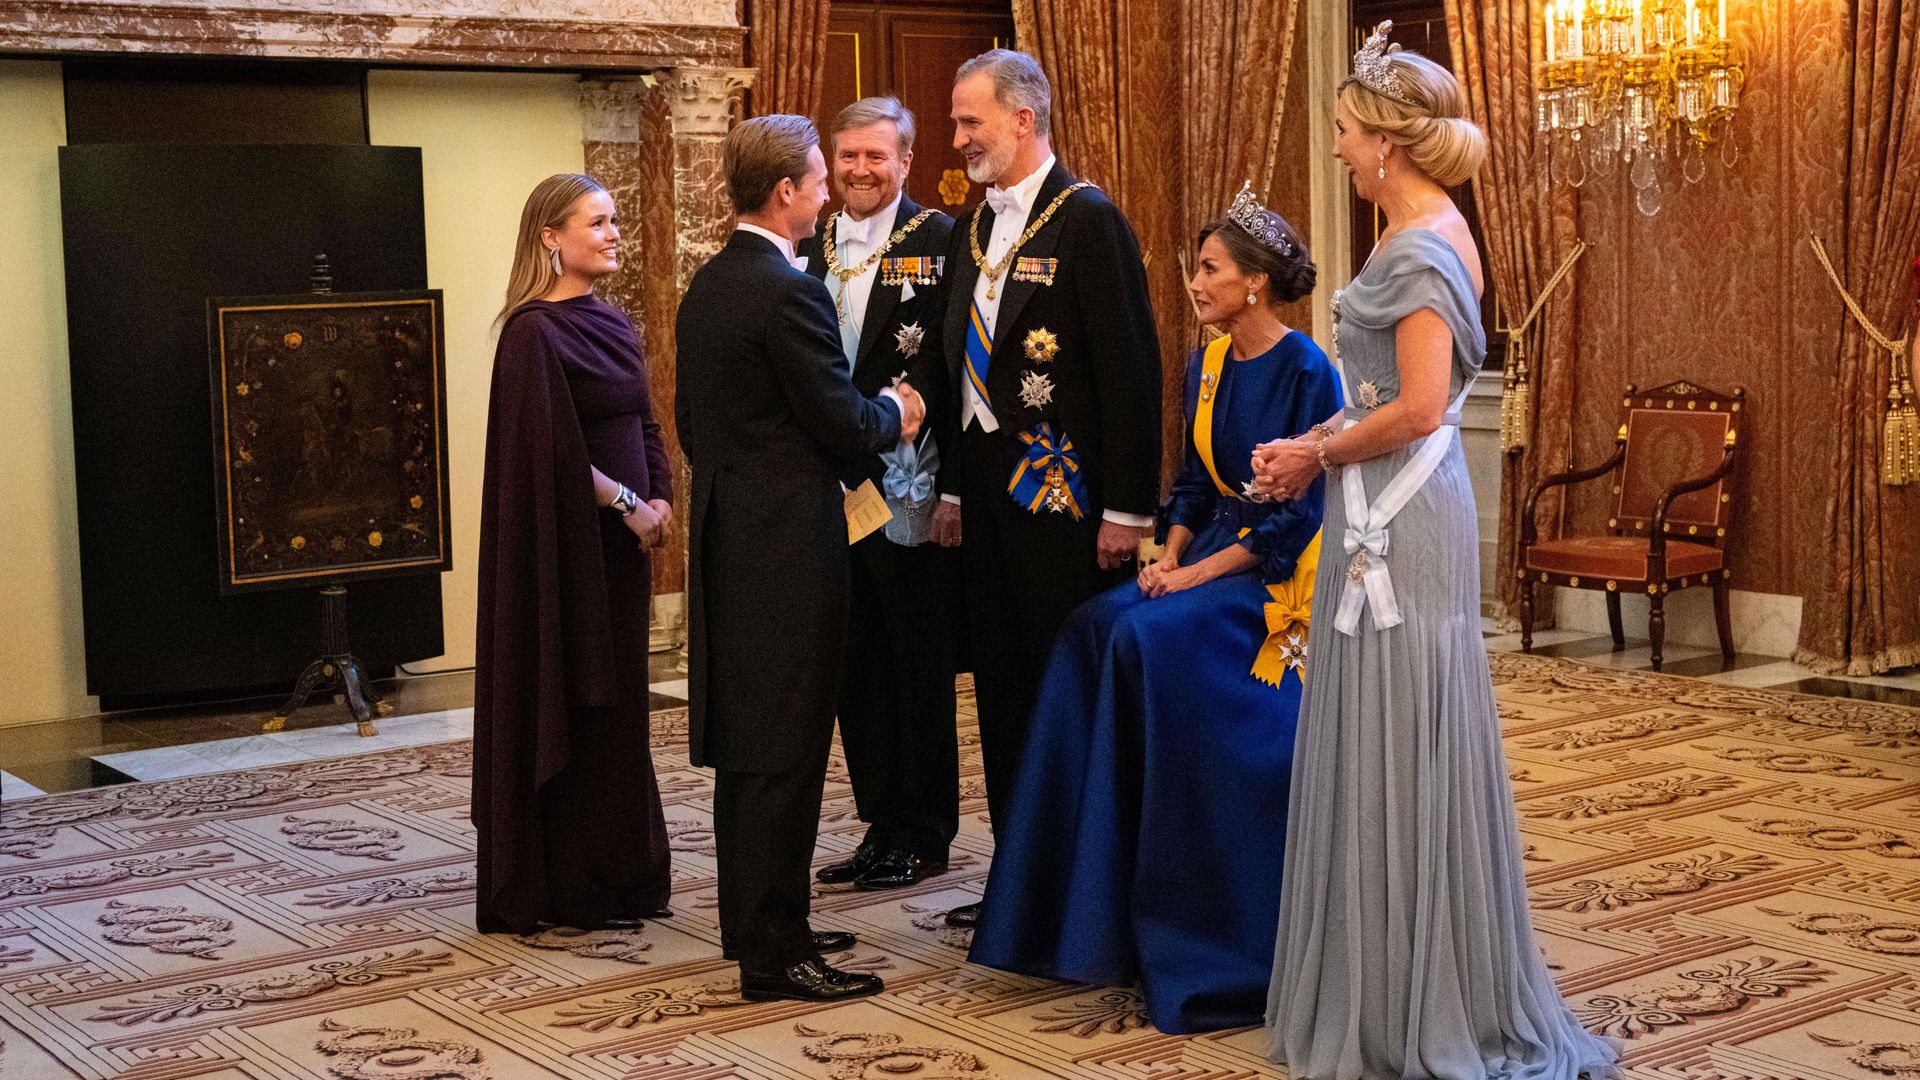 King Willem-Alexander and Queen Maxima of the Netherlands with King Felipe, Queen Letizia of Spain, Frenkie de Jong and Mikky Kiemeney at the state banquet at the Royal Palace in Amsterdam